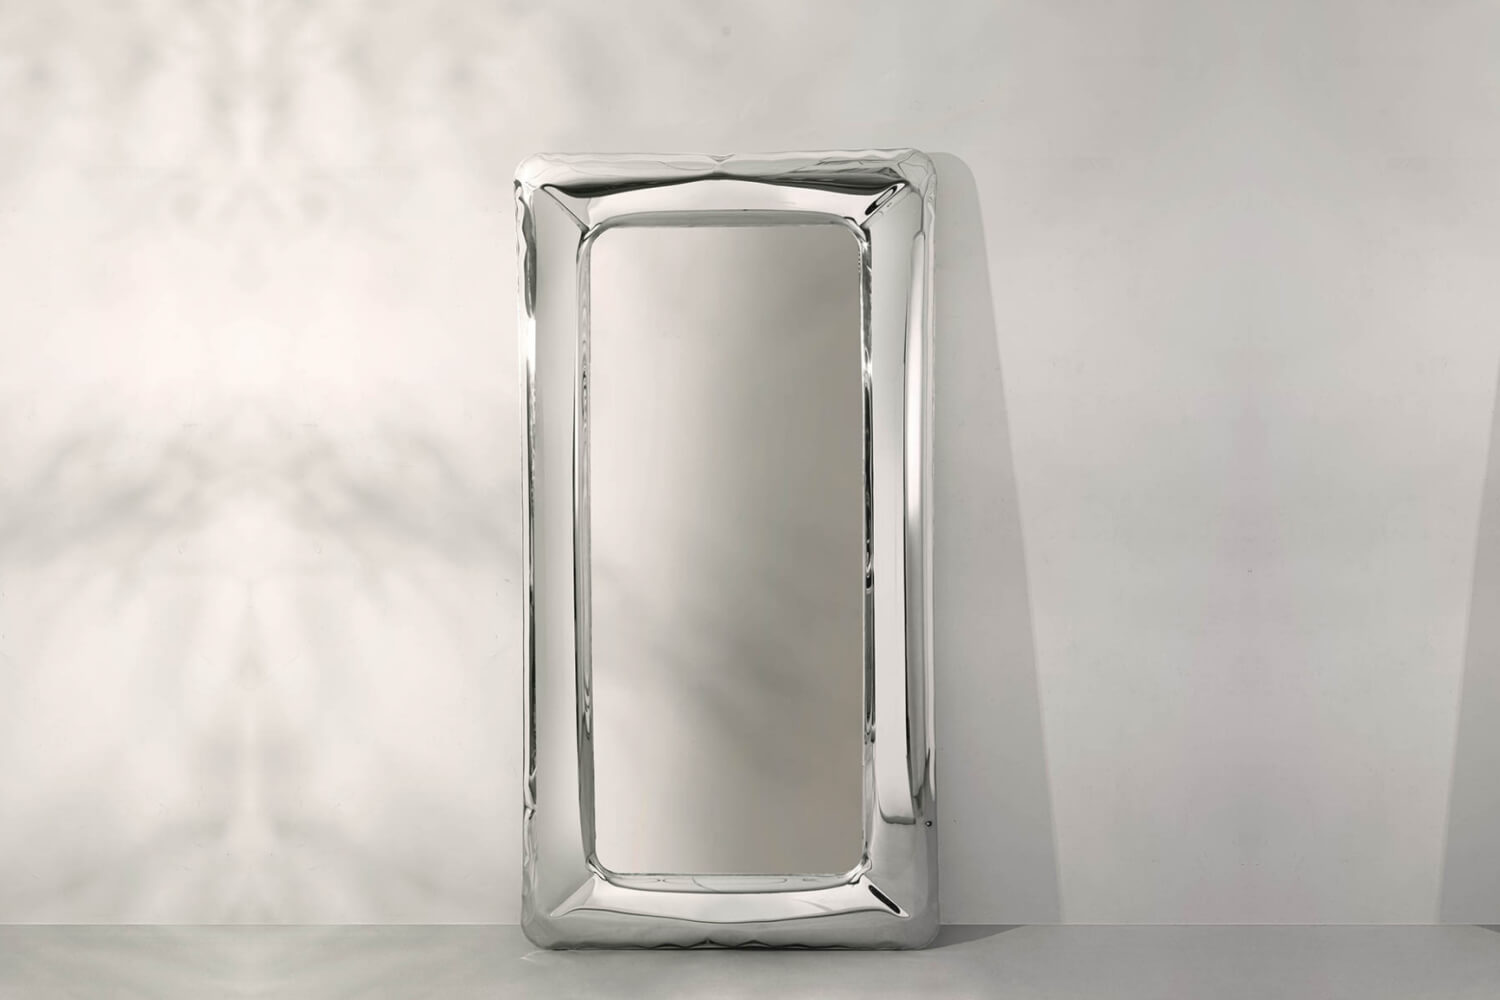 Tafla Contemporary Full-Length Polished Stainless Steel Framed Metallic Mirror, featuring a reflective, wavy frame, creating a modern, fluid appearance.